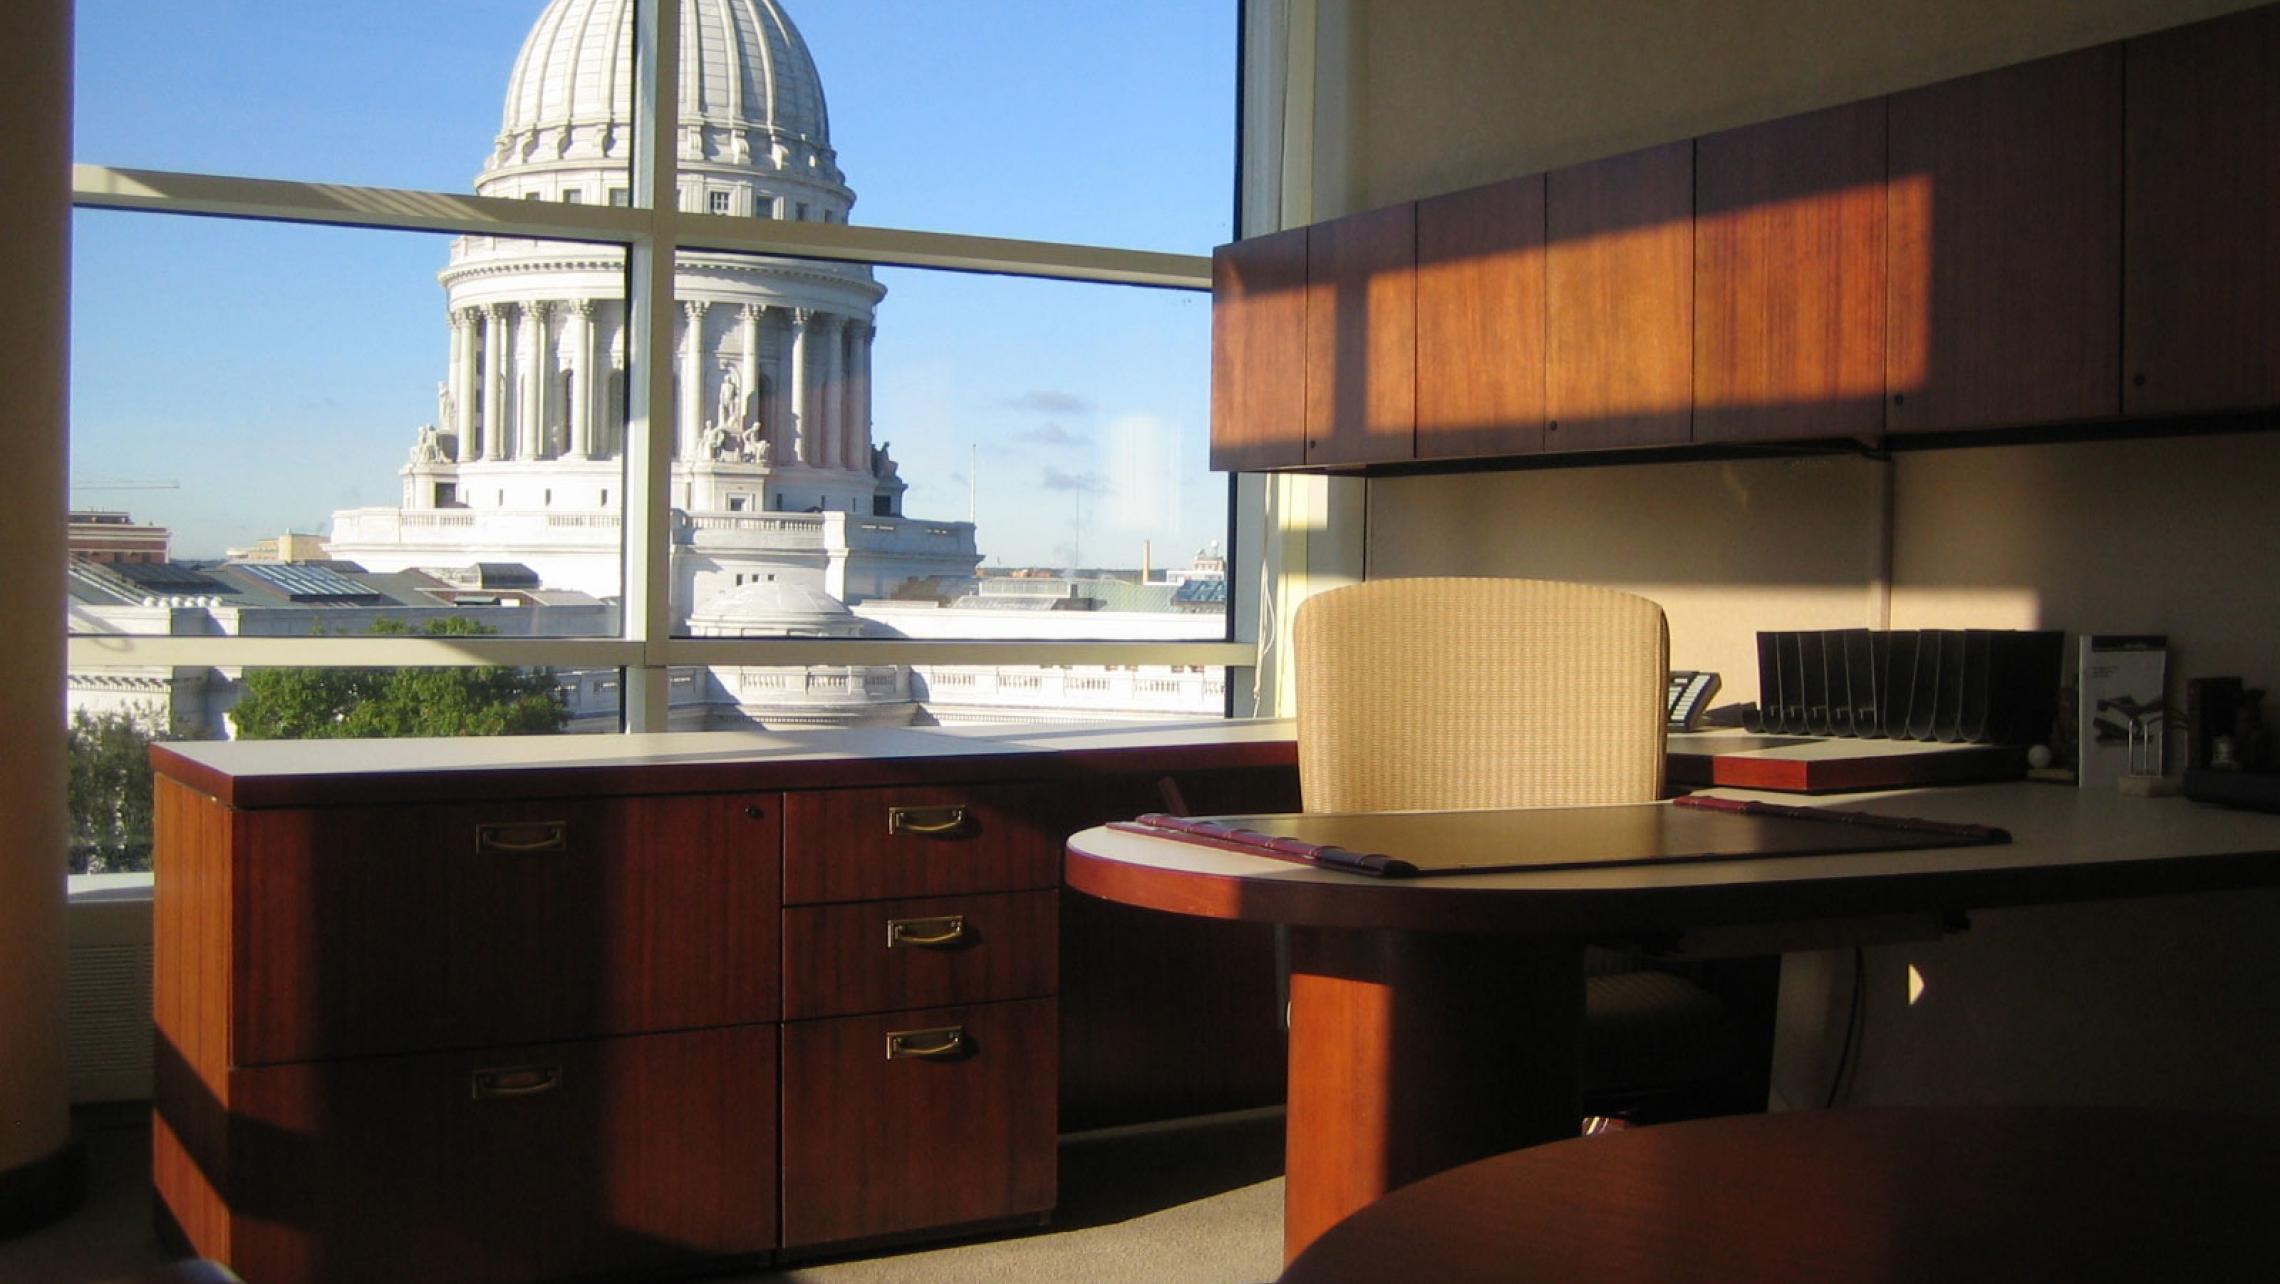 ULI US Bank Plaza - Office with a Capitol View